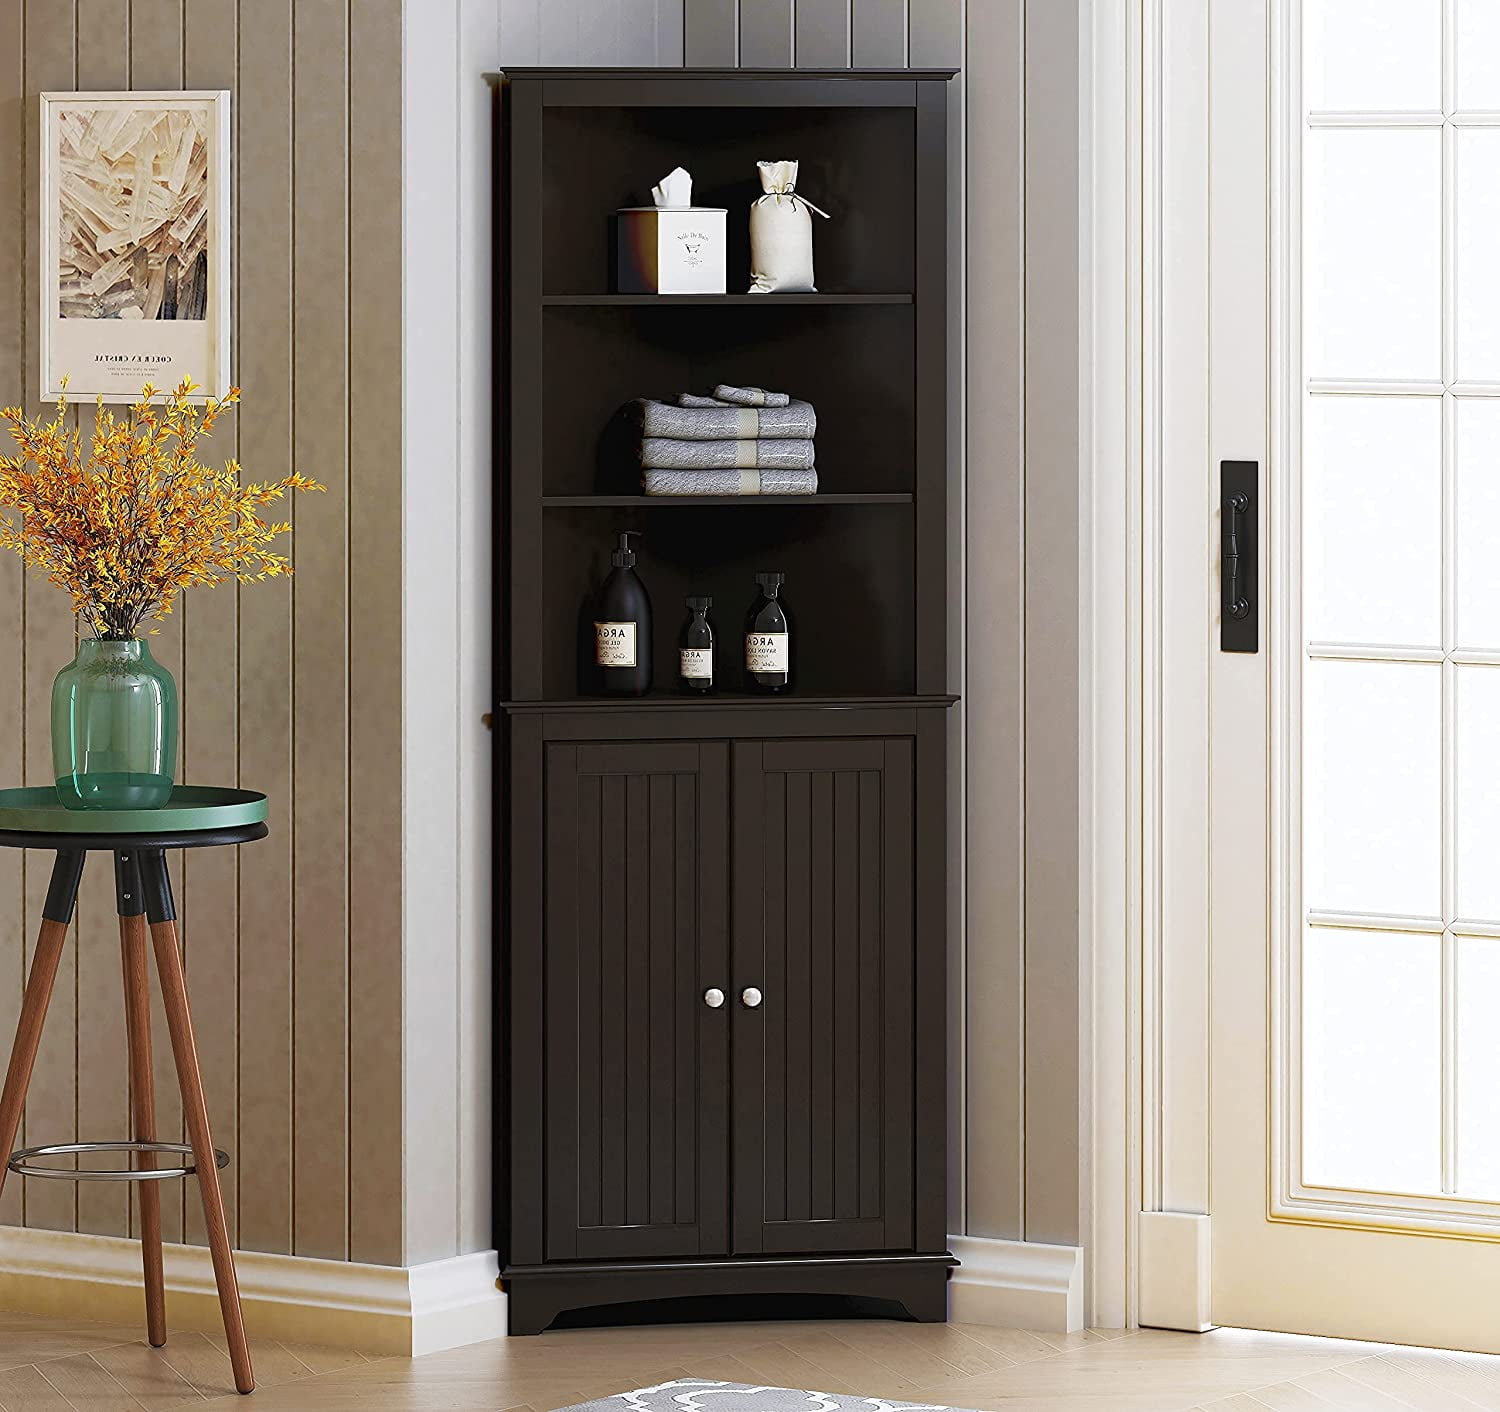 Spirich Home Tall Corner Cabinet With, Shelving Cabinets Living Room